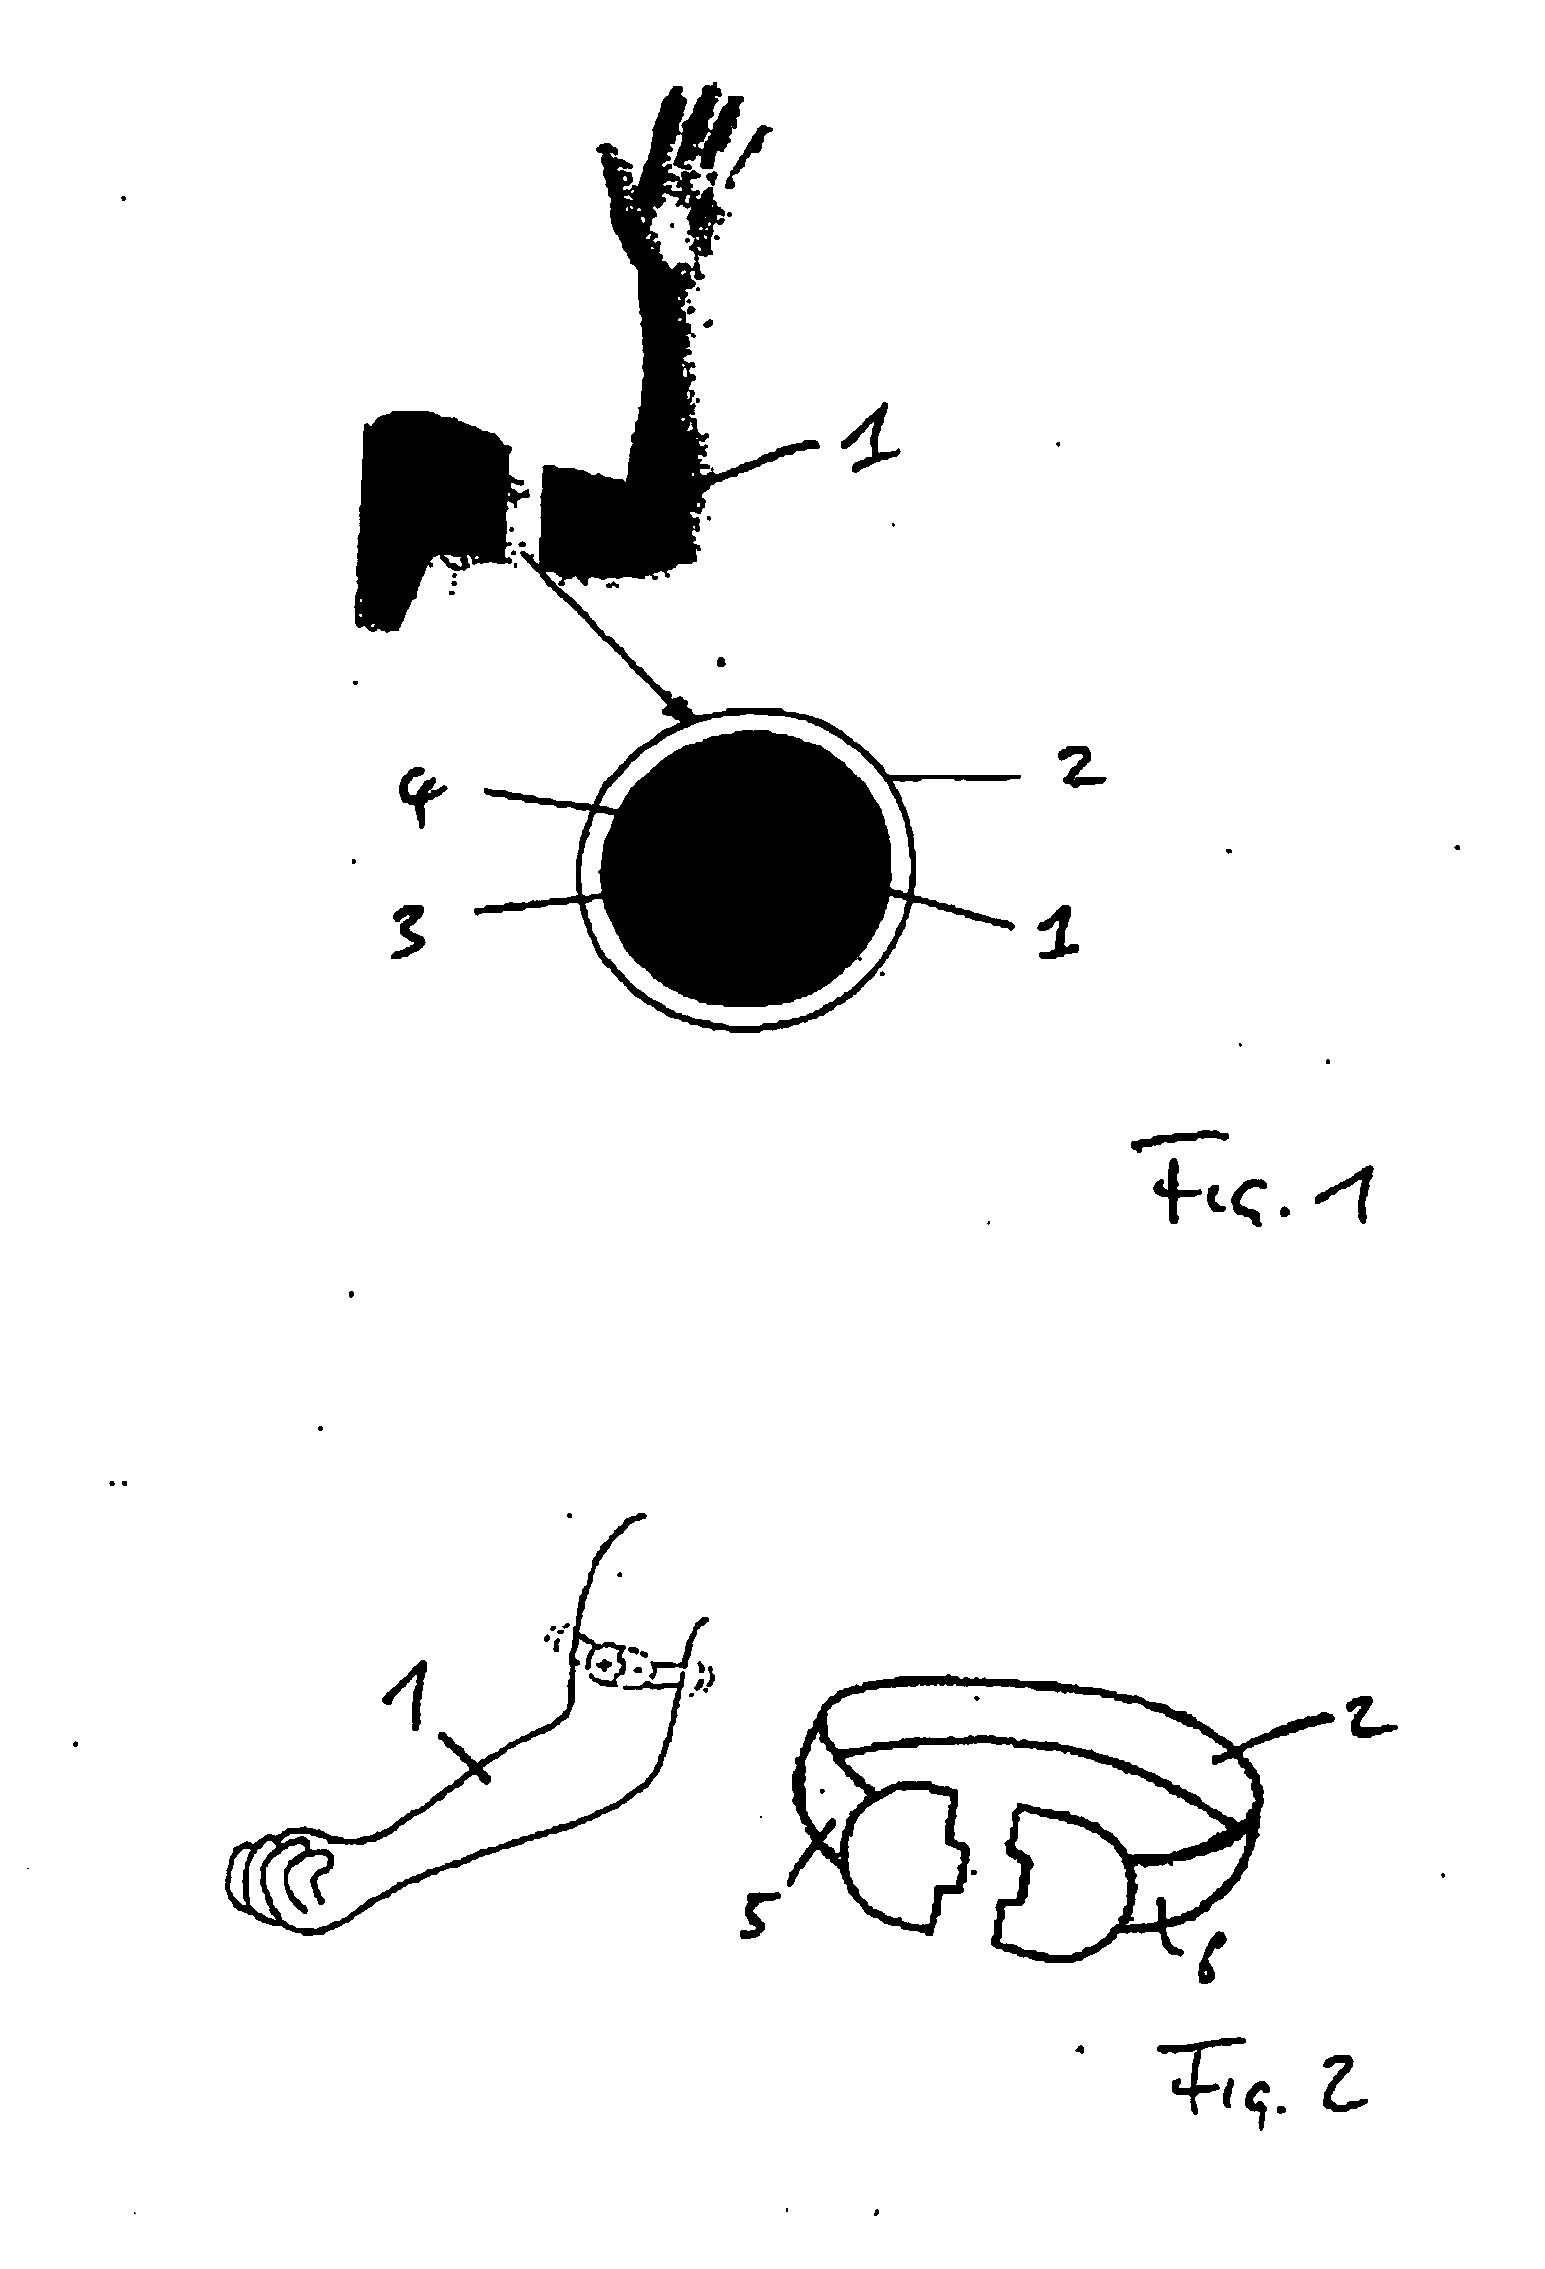 Device and method for reducing pain